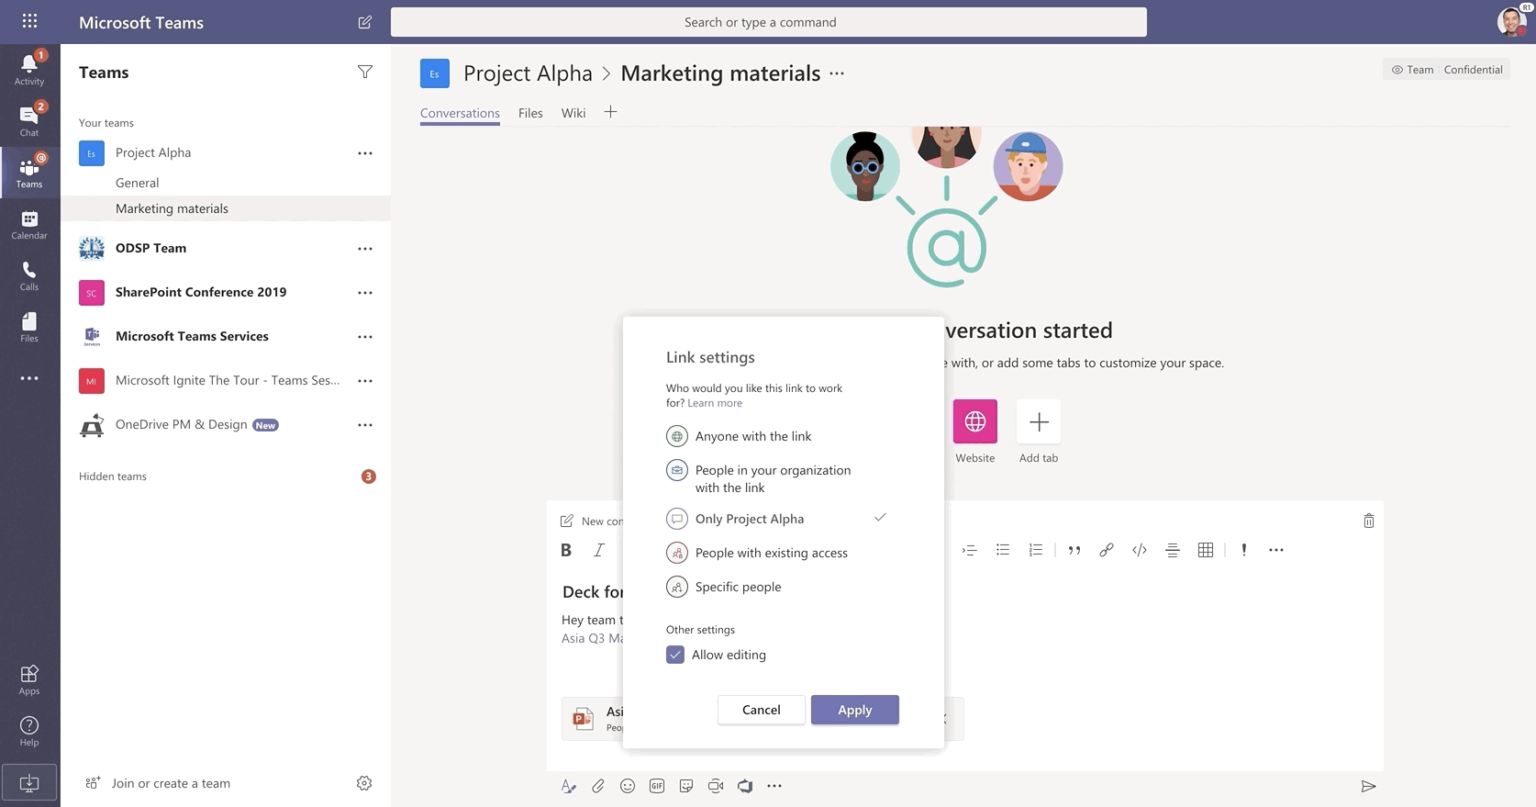 Image of a conversation in Microsoft Teams.